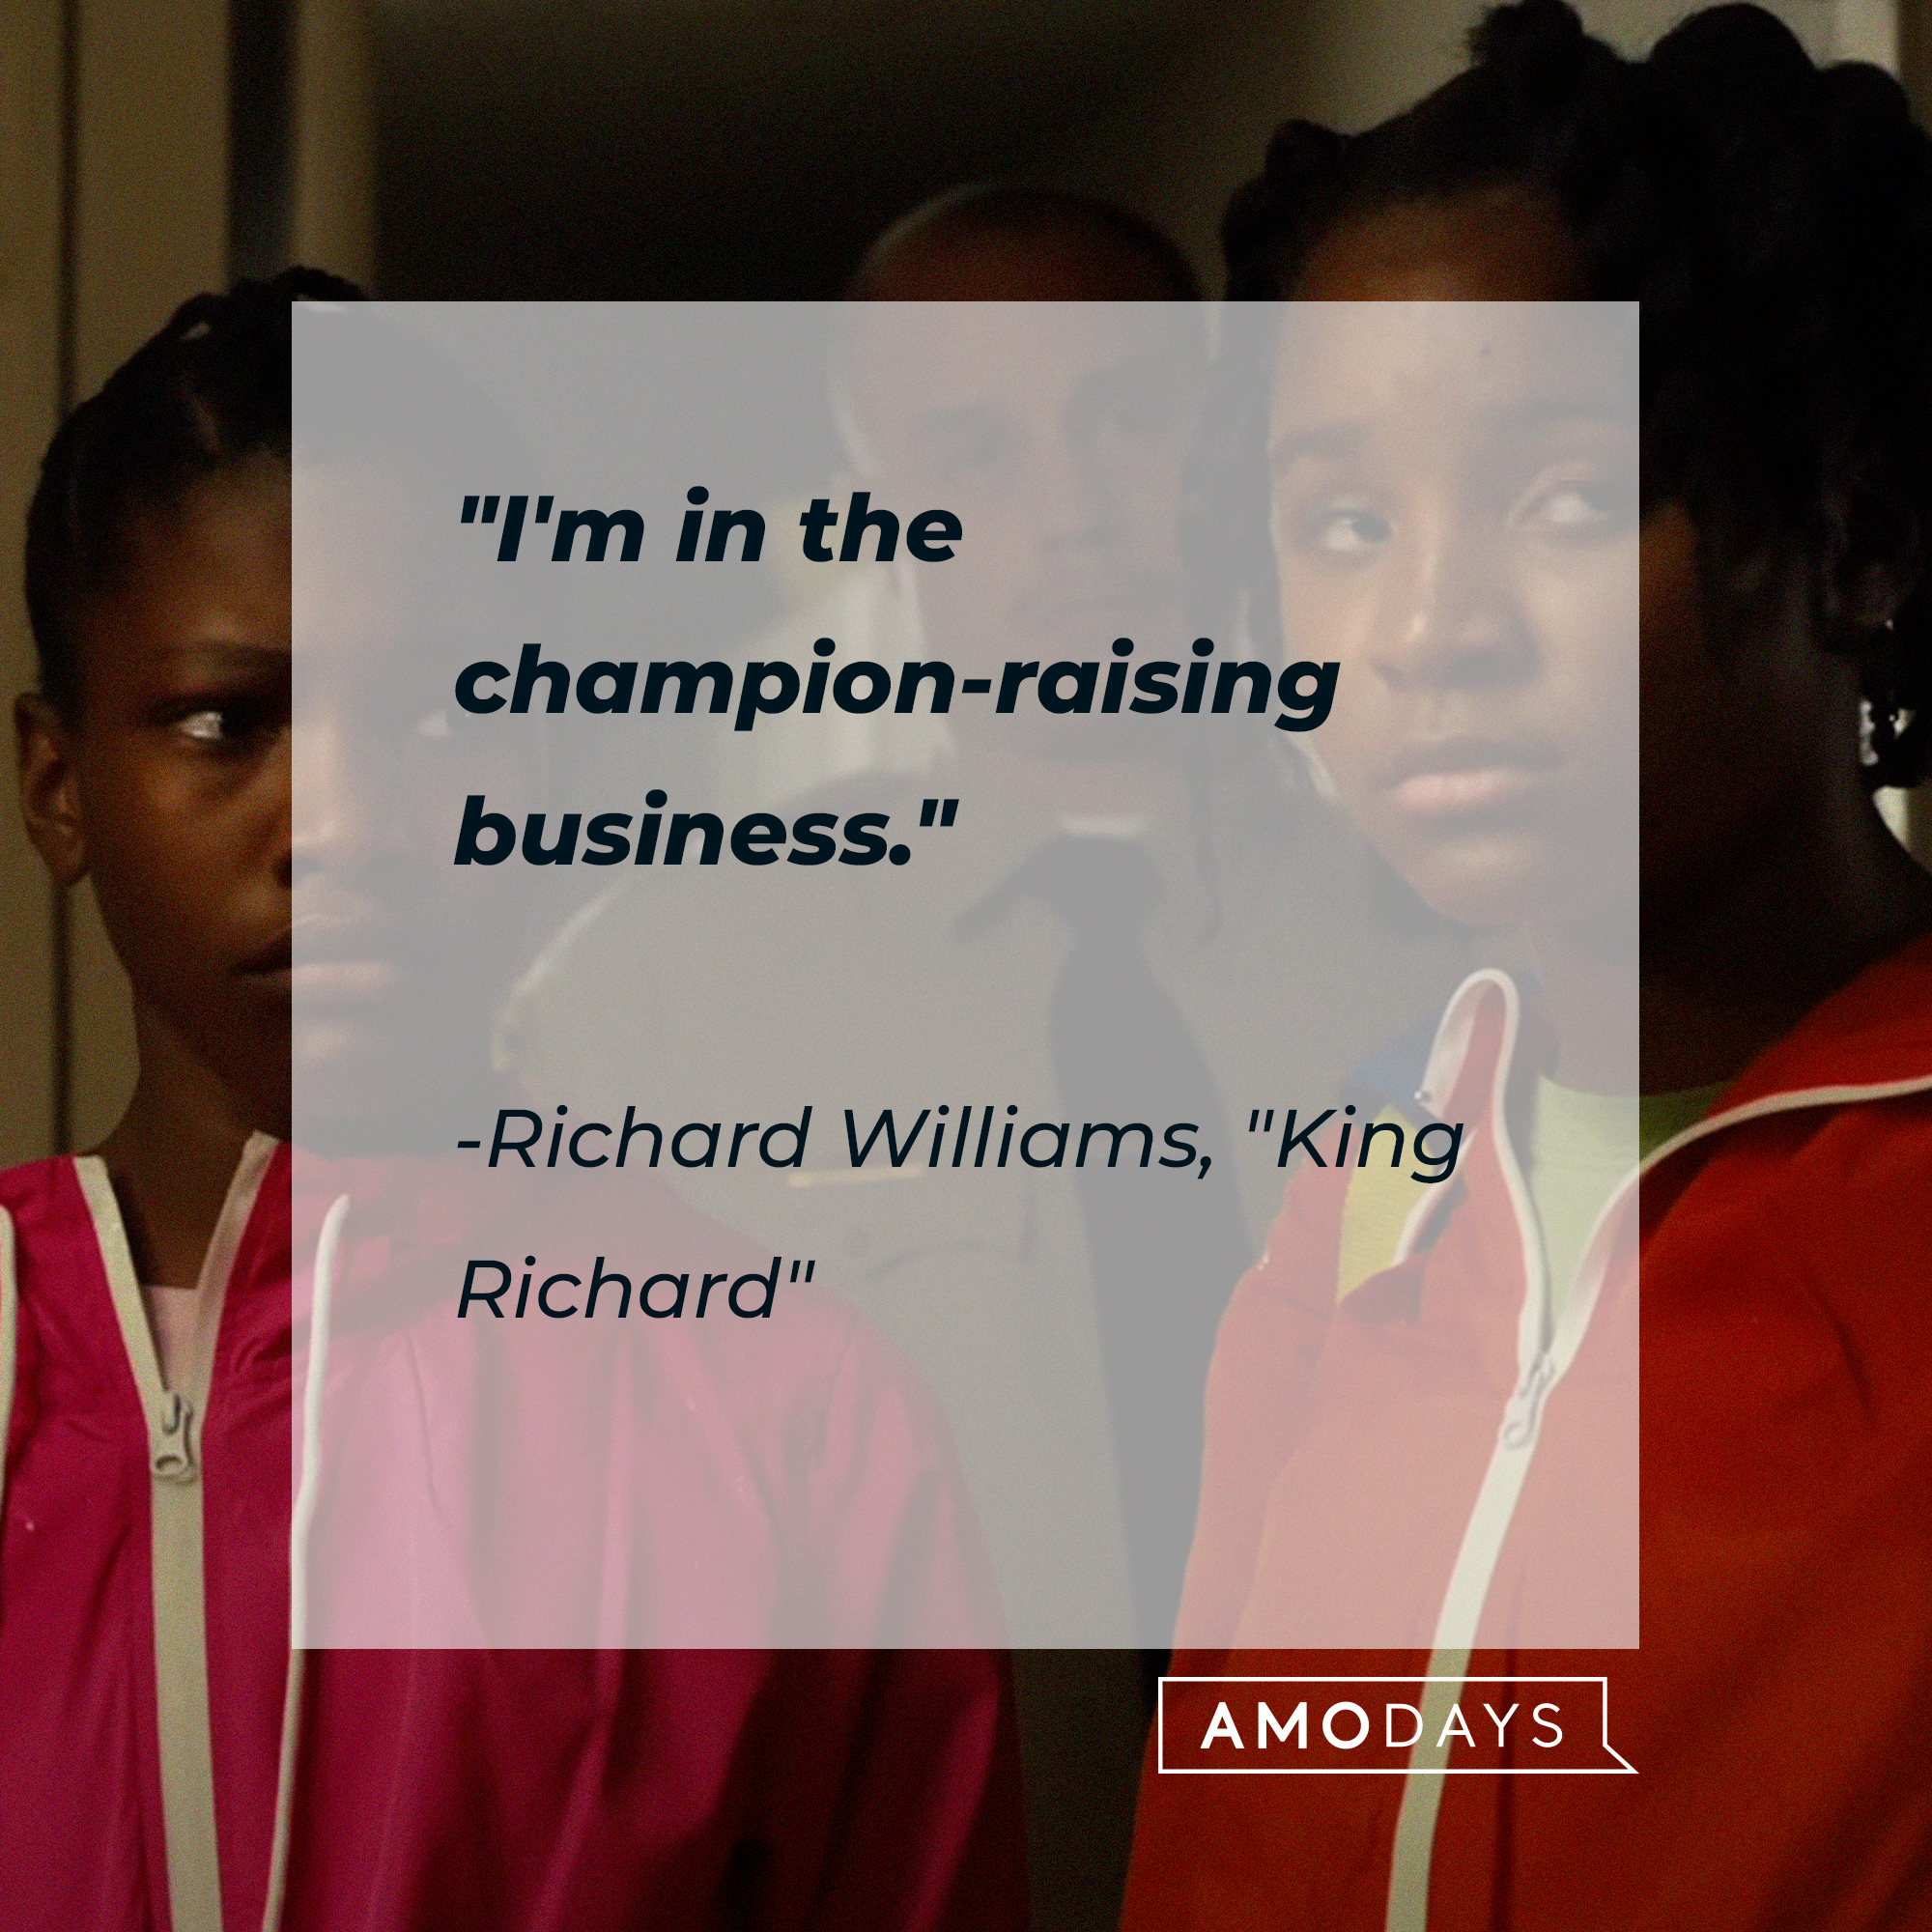 Richard Williams‘ quote: "I'm in the champion-raising business." | Image: youtube.com/WarnerBrosPictures